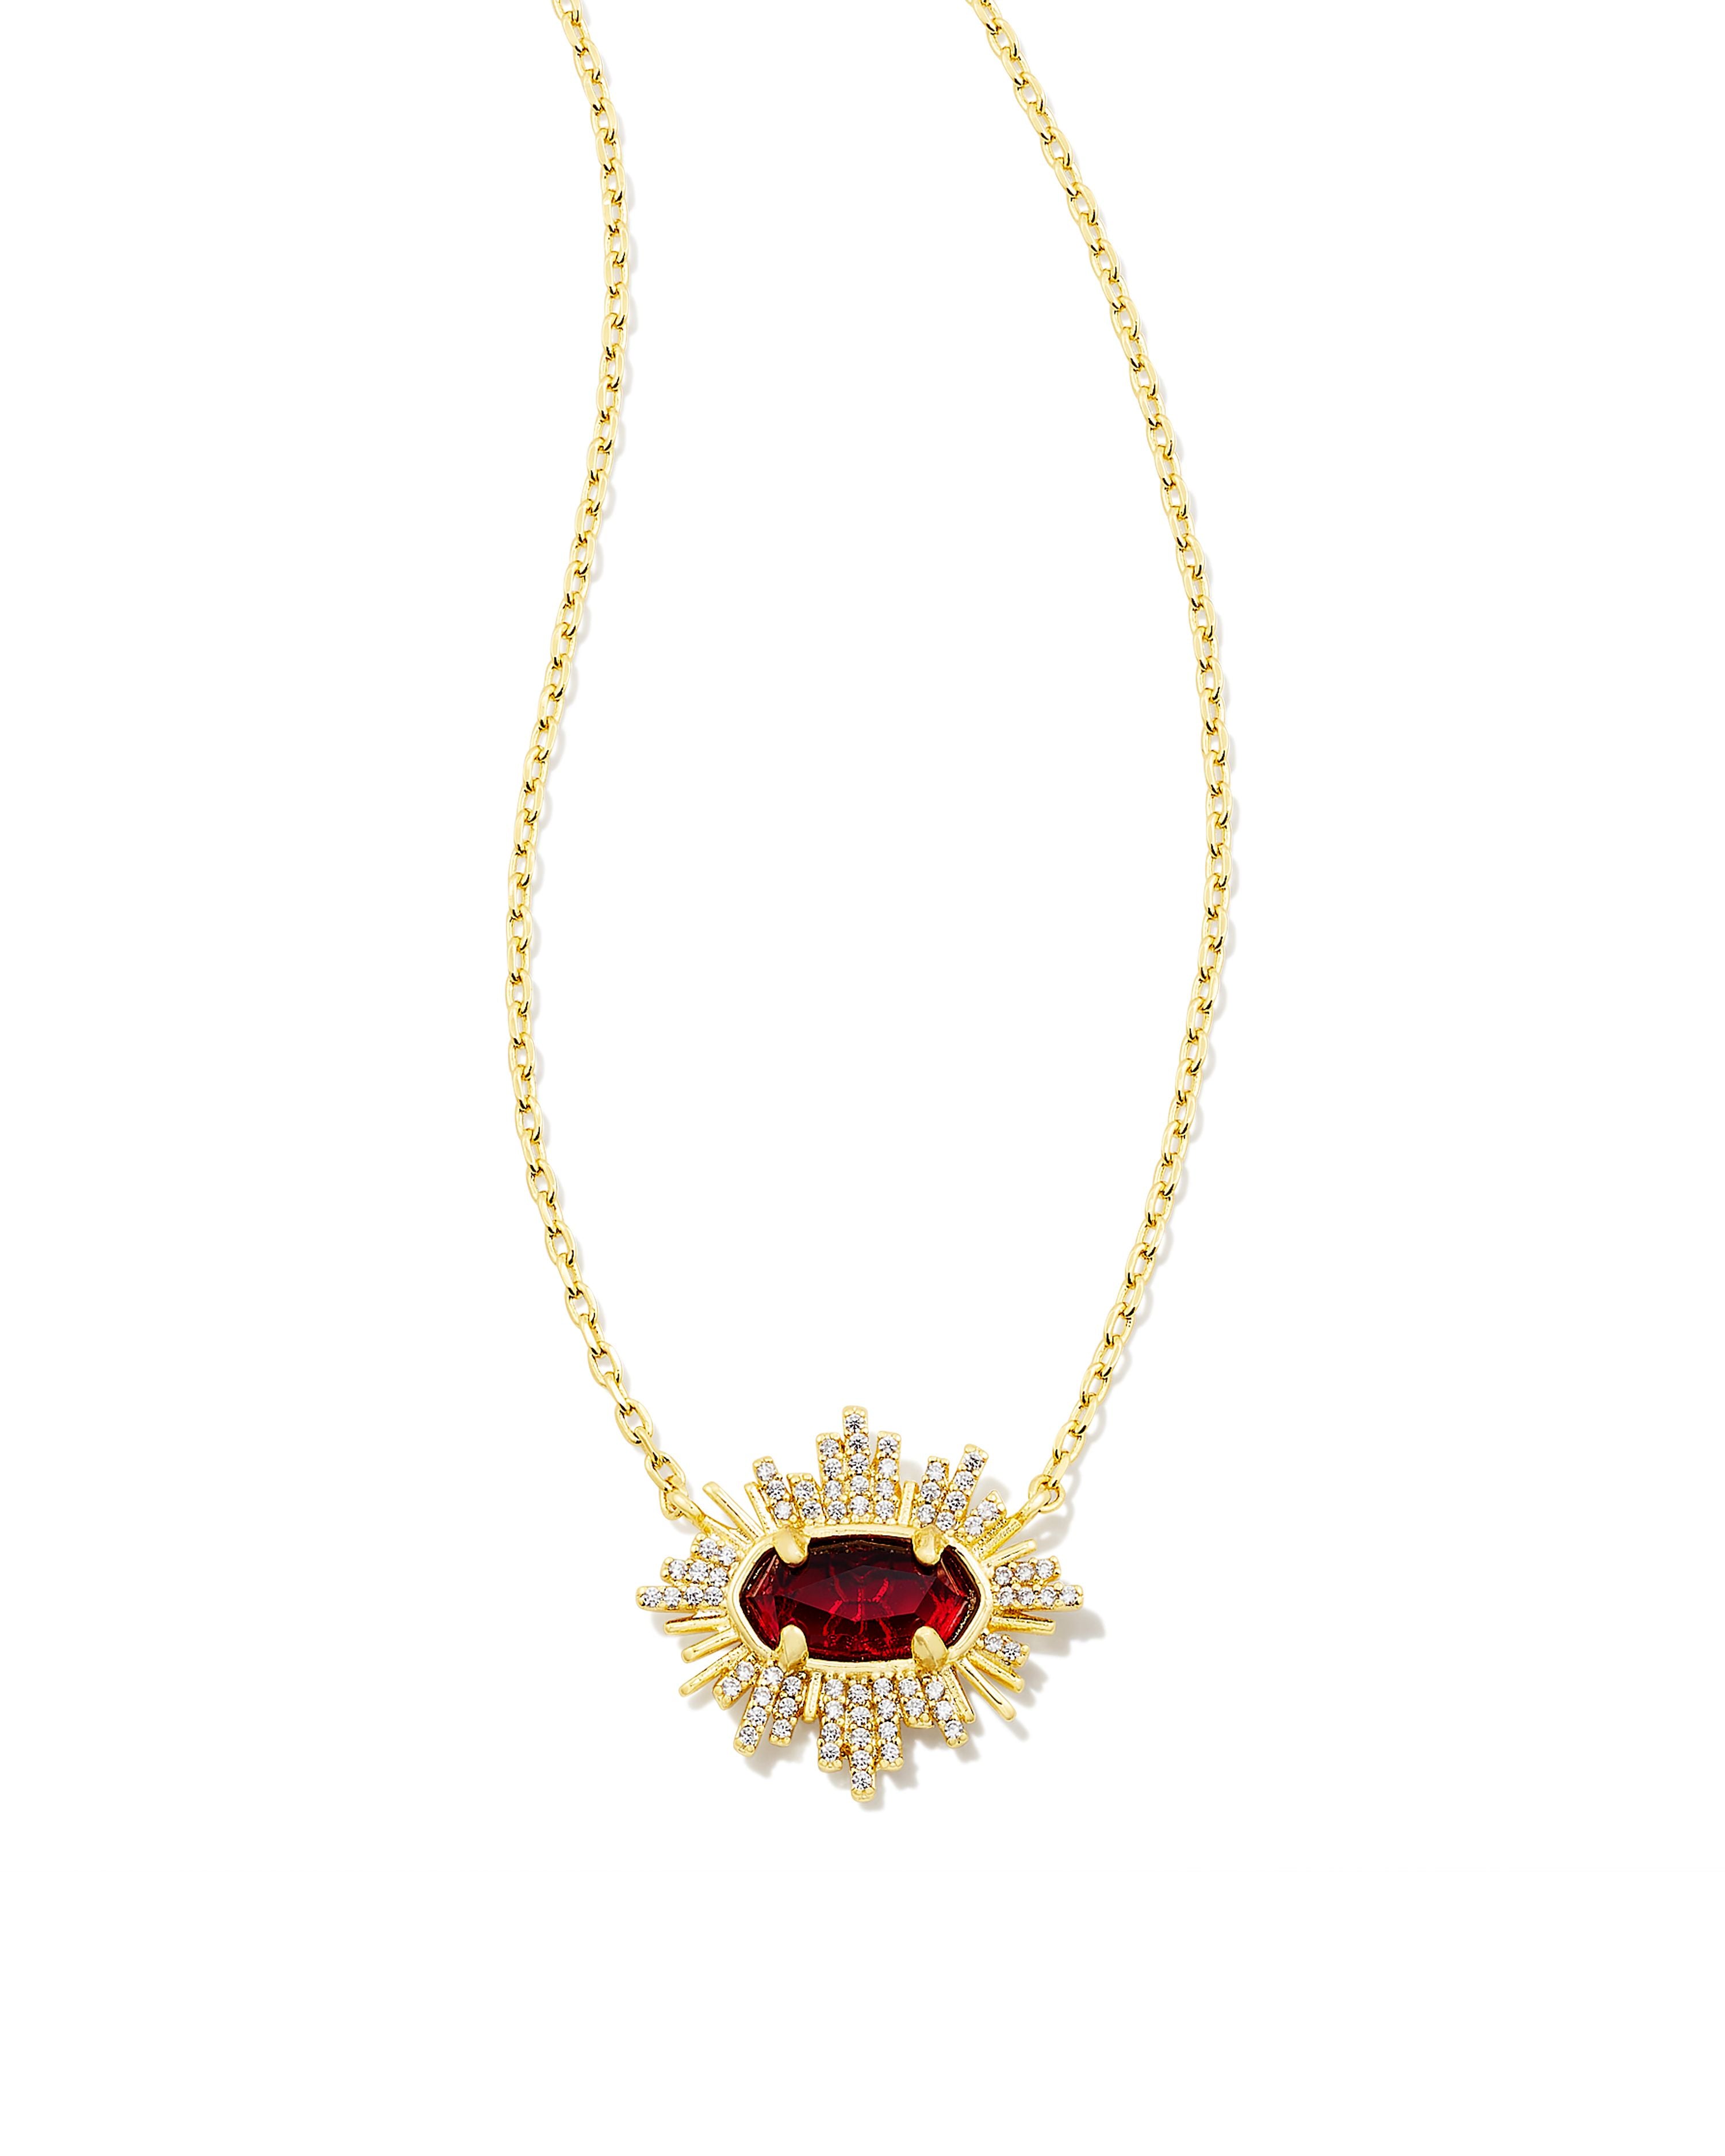 Kendra Scott Grayson Sunburst Pendant Necklace in Red Glass and Gold